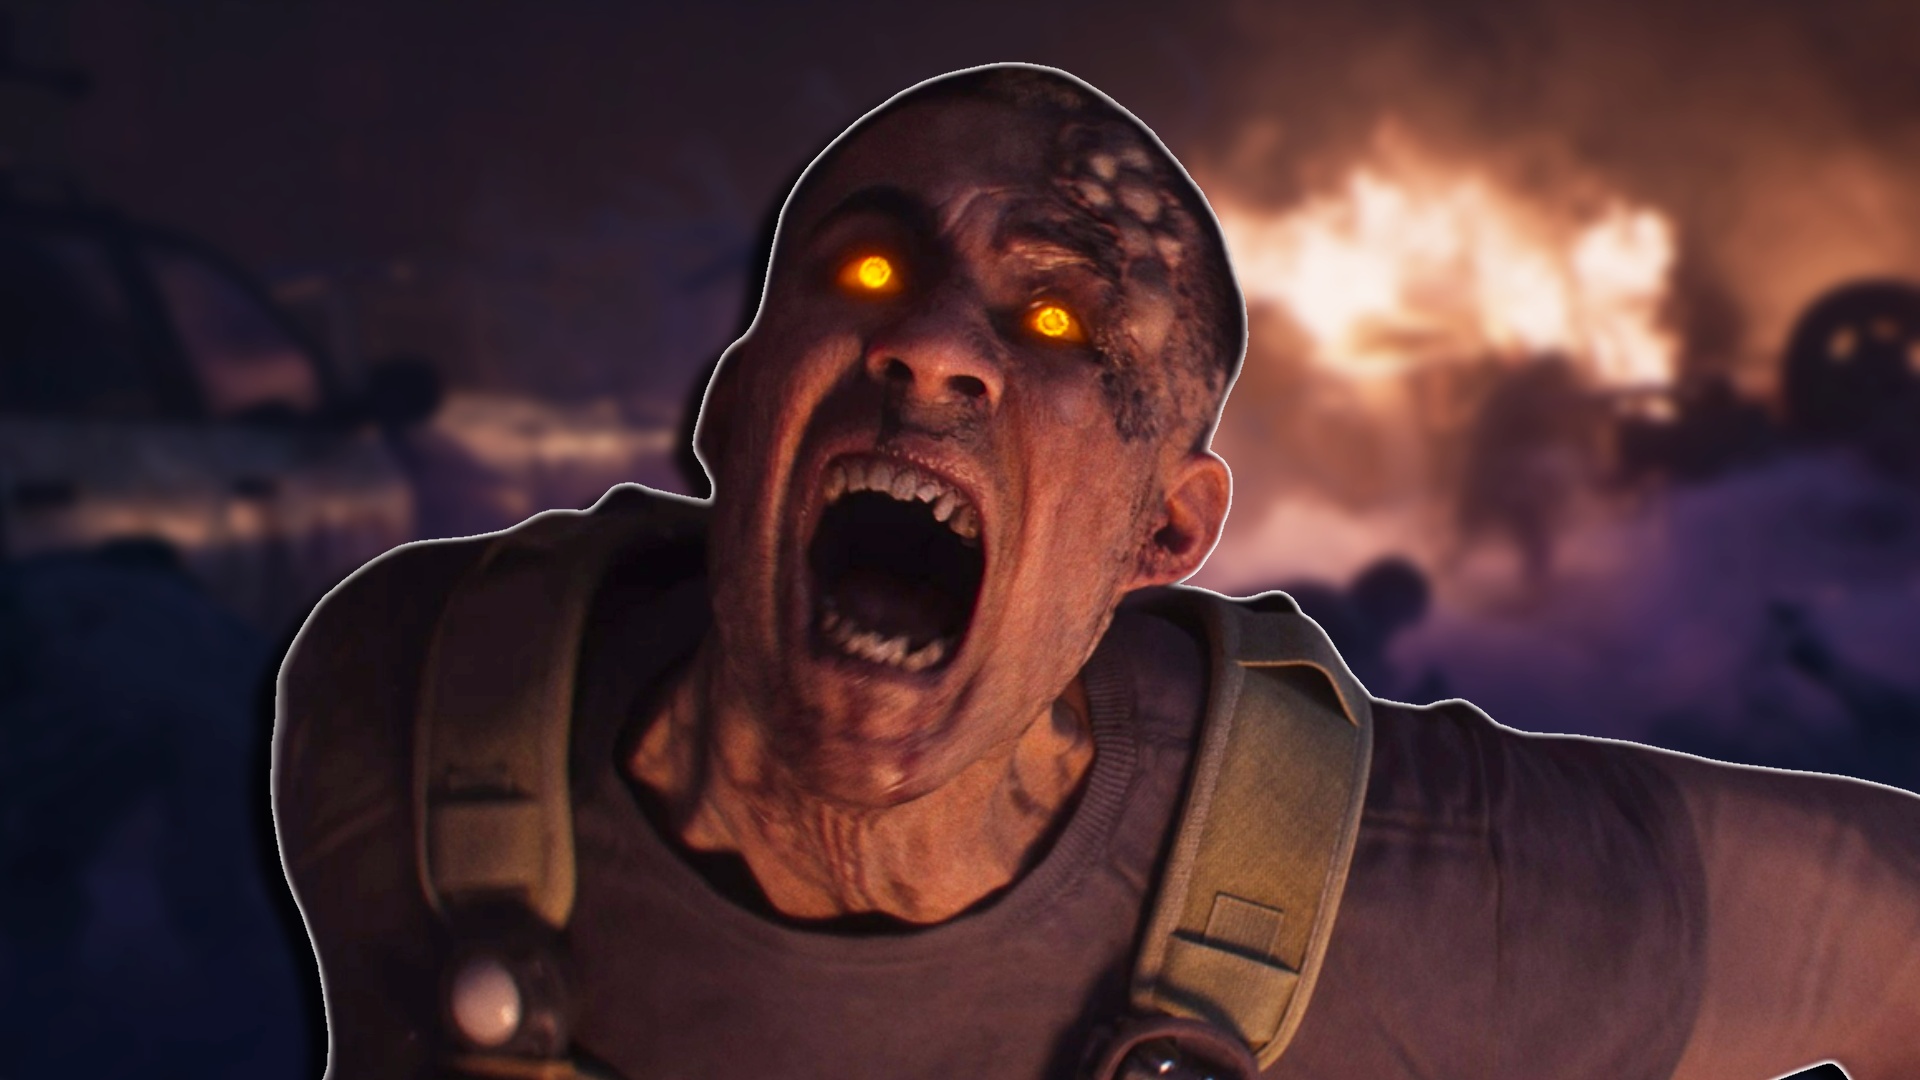 Call of Duty Vanguard Zombies: Story, Characters, Maps, Modes, and Gameplay